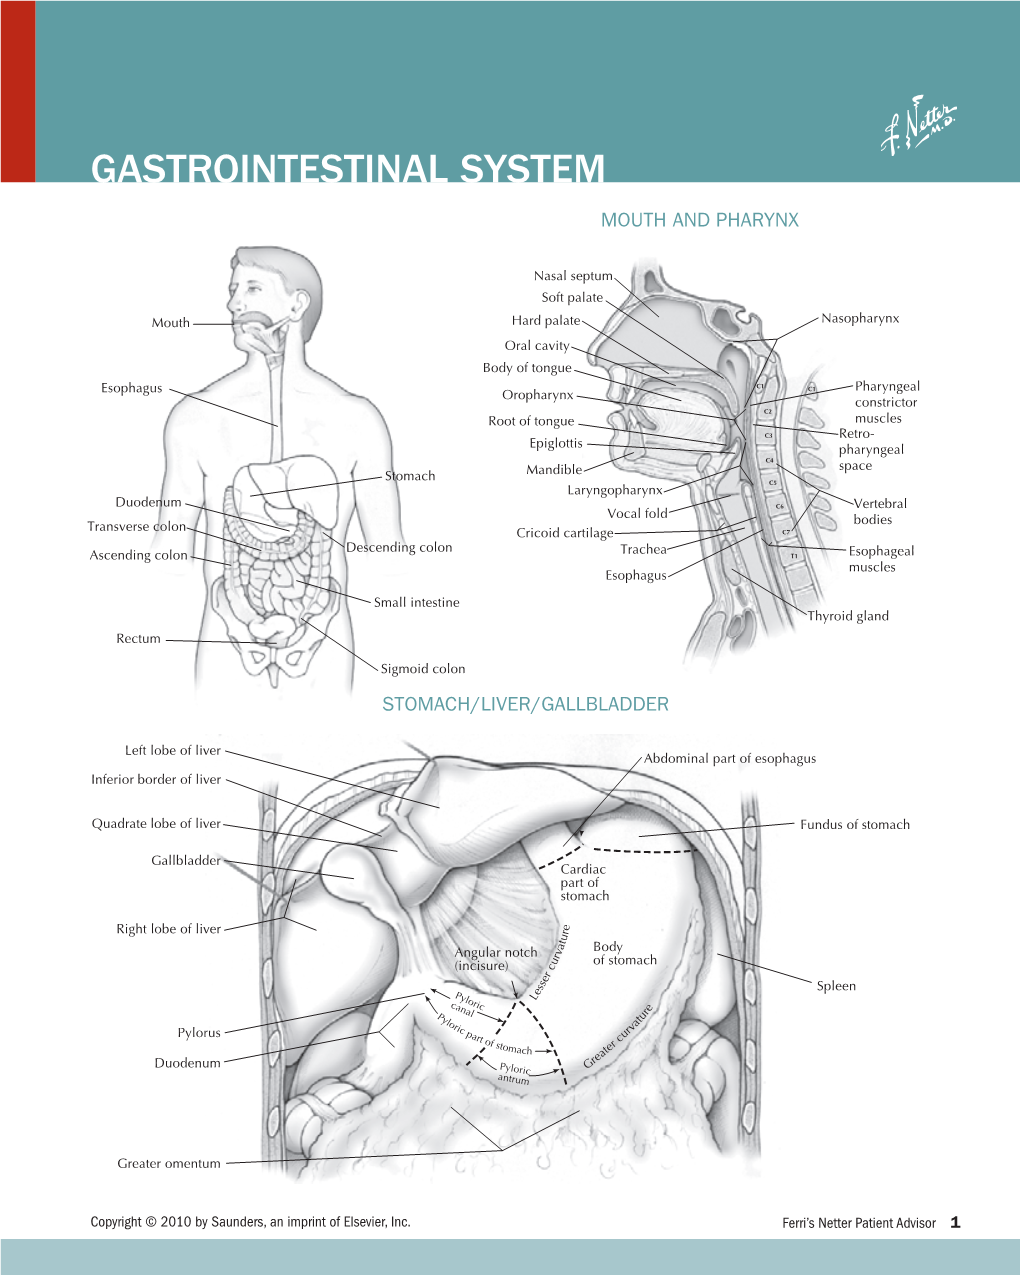 Gastrointestinal System Mouth and Pharynx